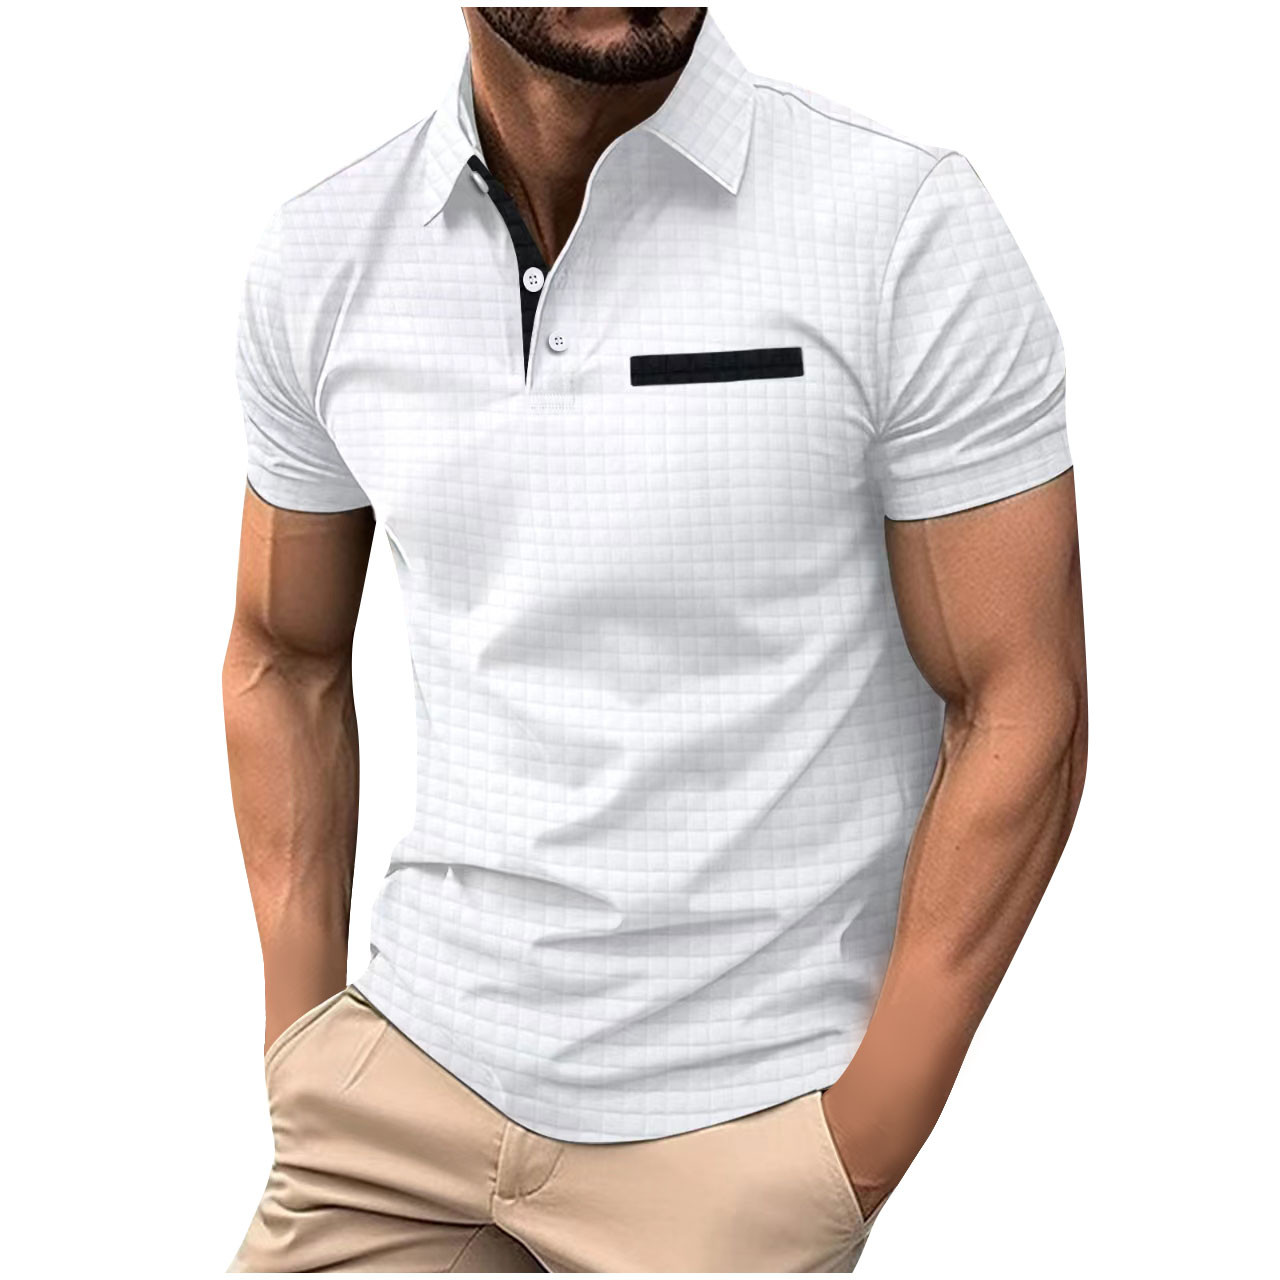 TUWABEII Mens Shirts Casual Short Sleeve Button Lapel Golf Fit Tee ...